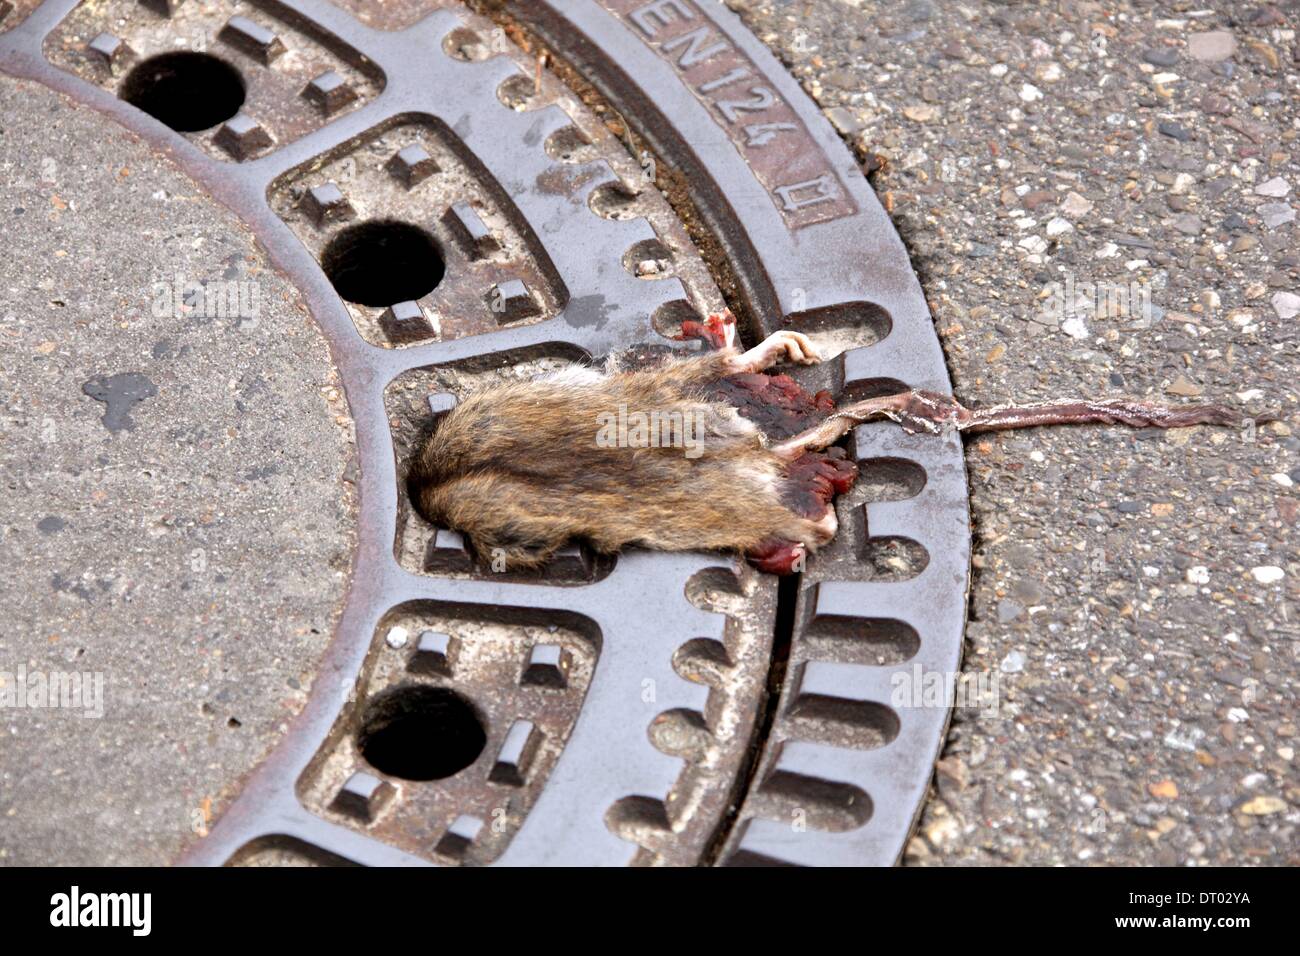 Dead rat on street with head in a manhole cover, October 30, 2010. Stock Photo